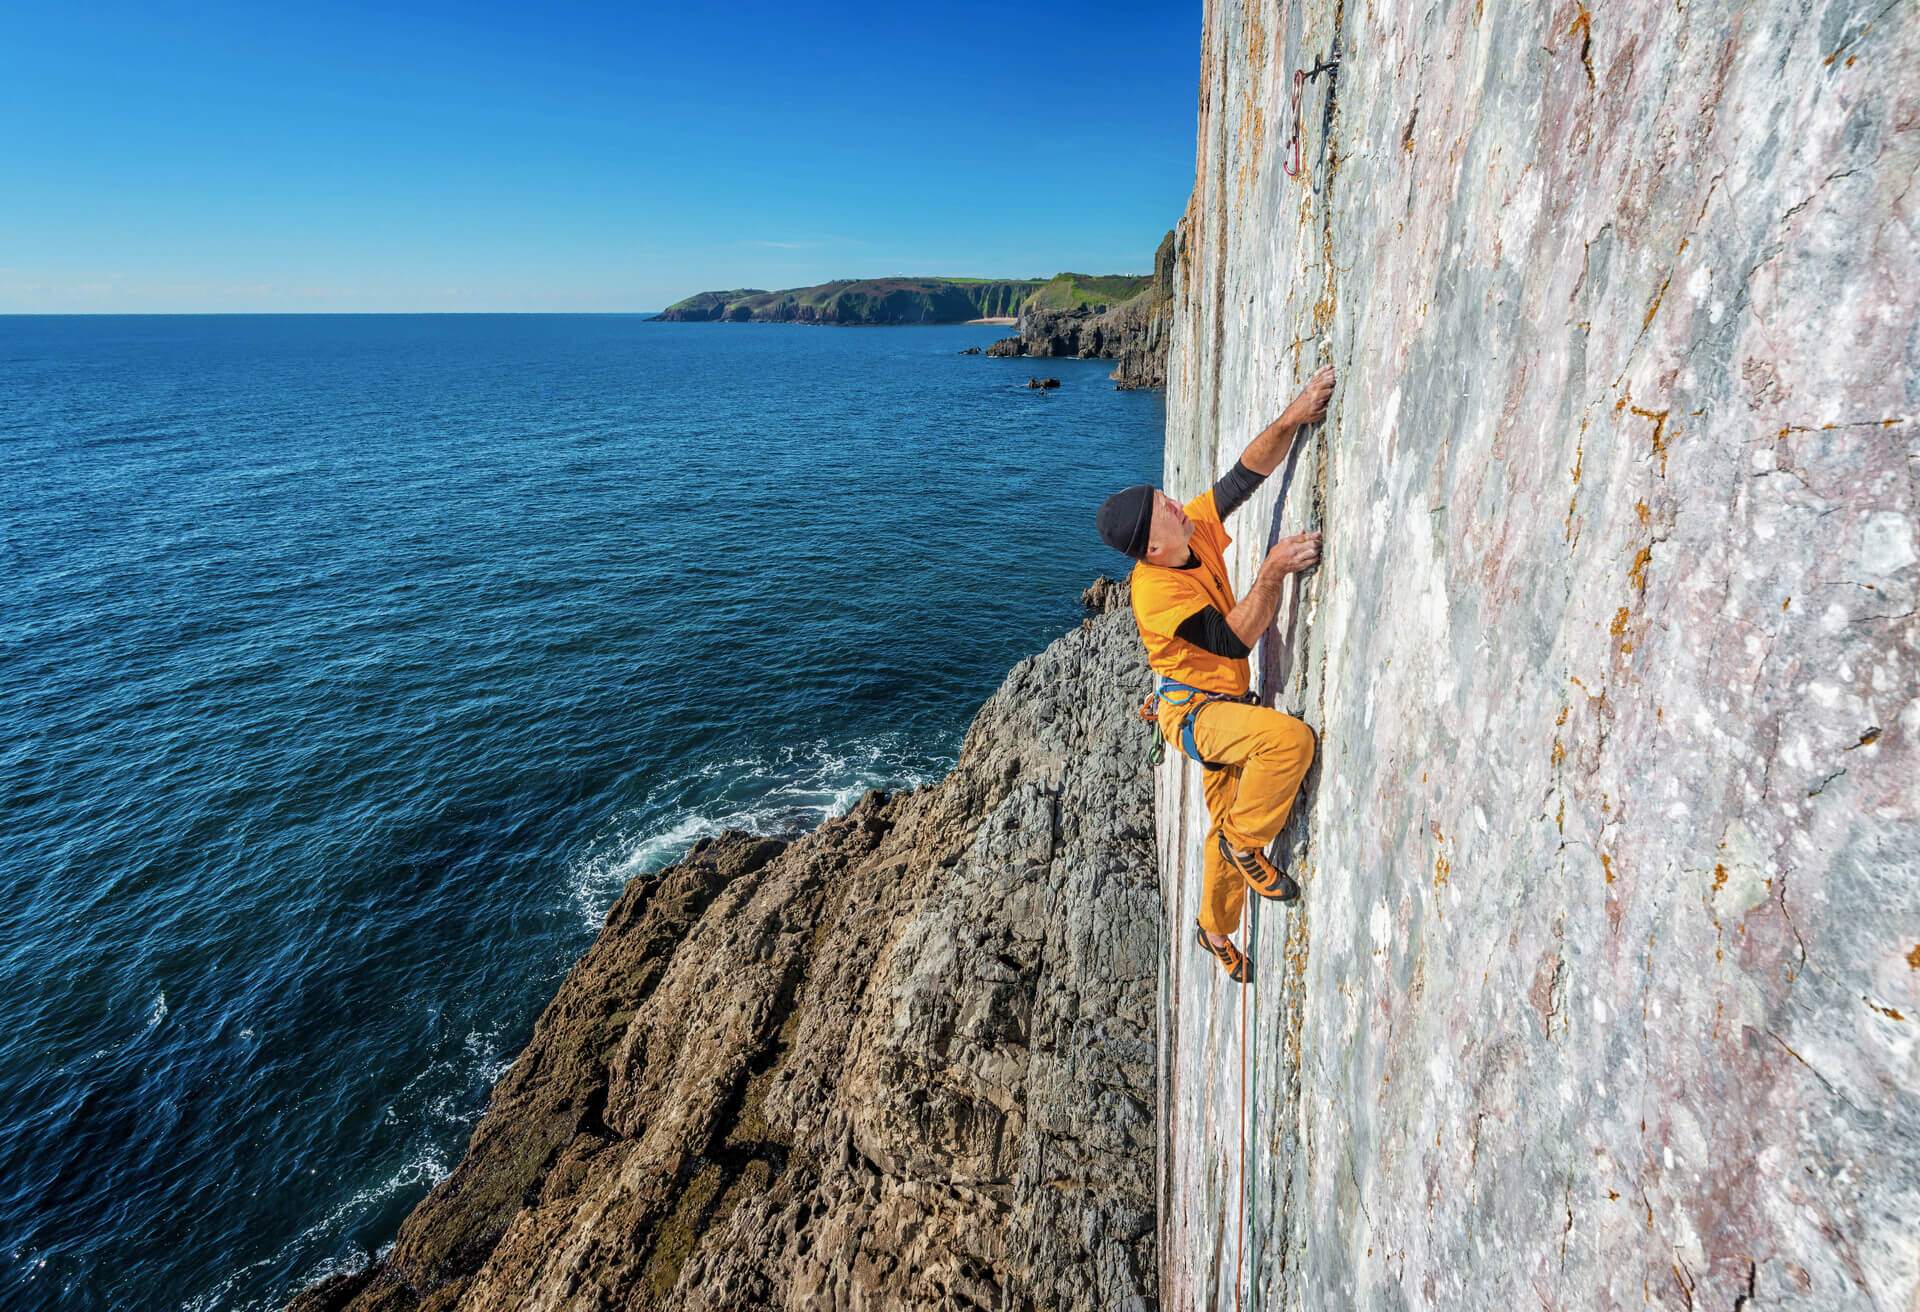 dest_uk_wales_pembroke_mother-carey_s-kitchen_theme_climbing_gettyimages-597060039_universal_within-usage-period_83024